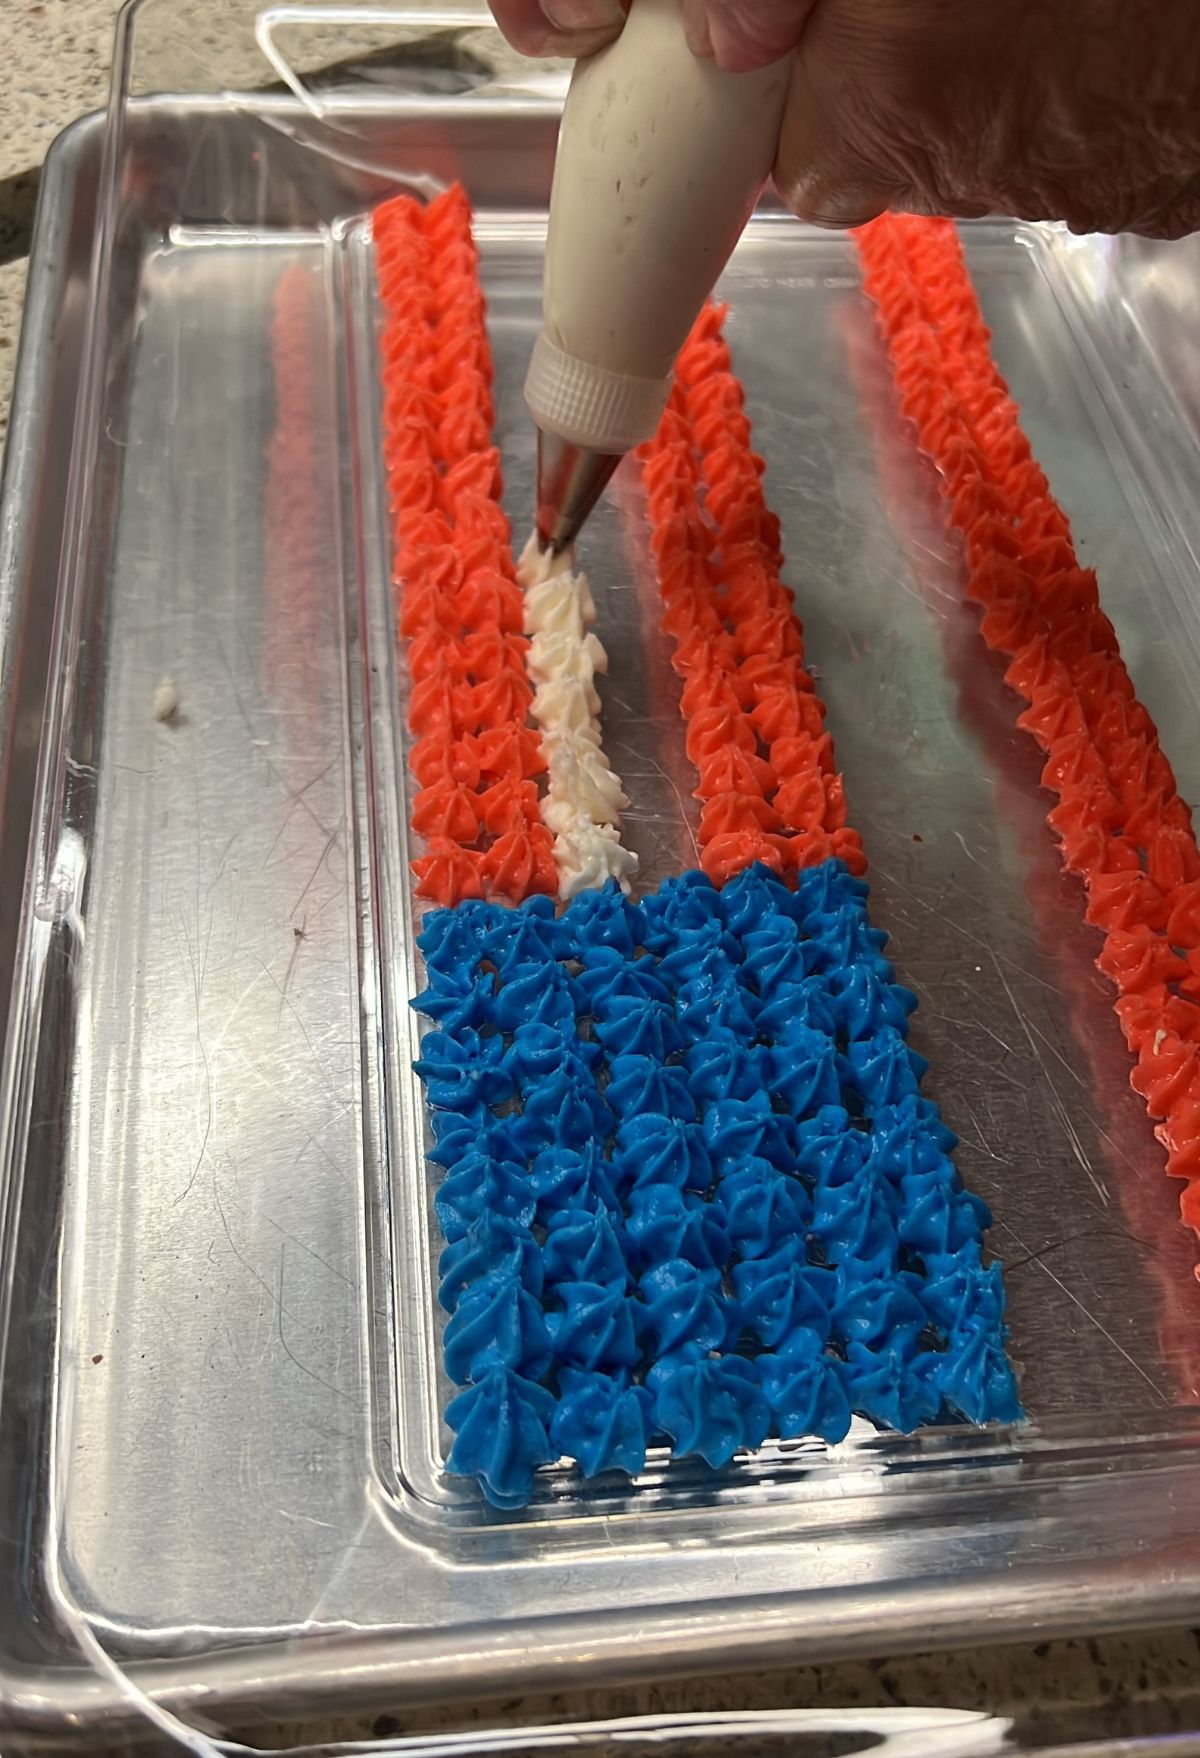 RED, WHITE, AND BLUE DUNKAROO DIP